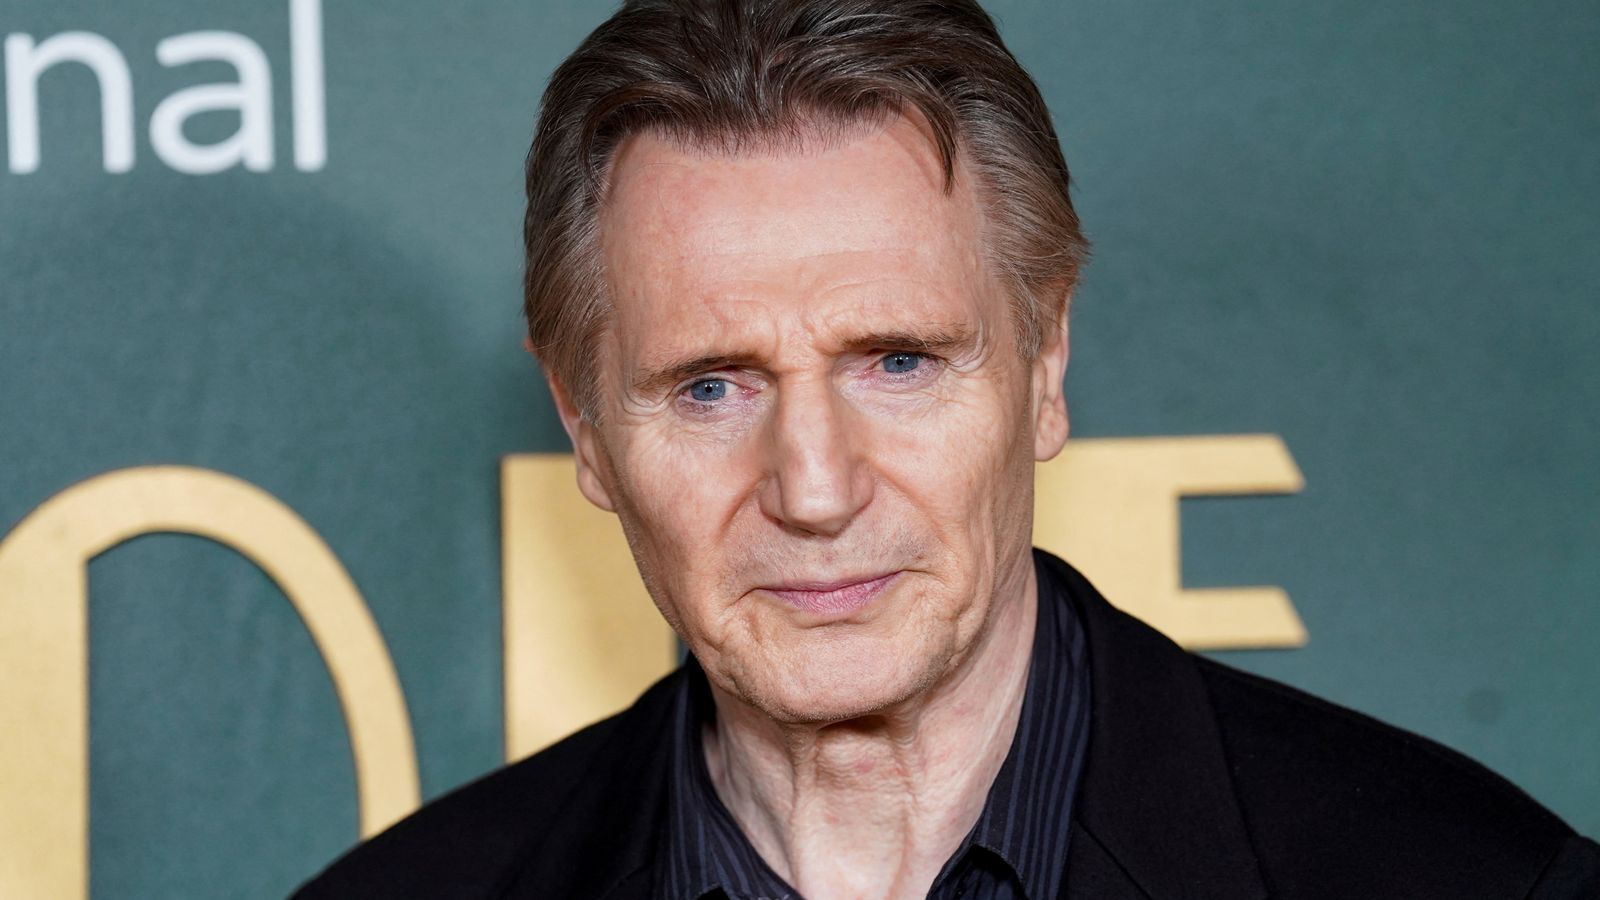 'I think it will happen': Liam Neeson says Ireland will be united during his lifetime